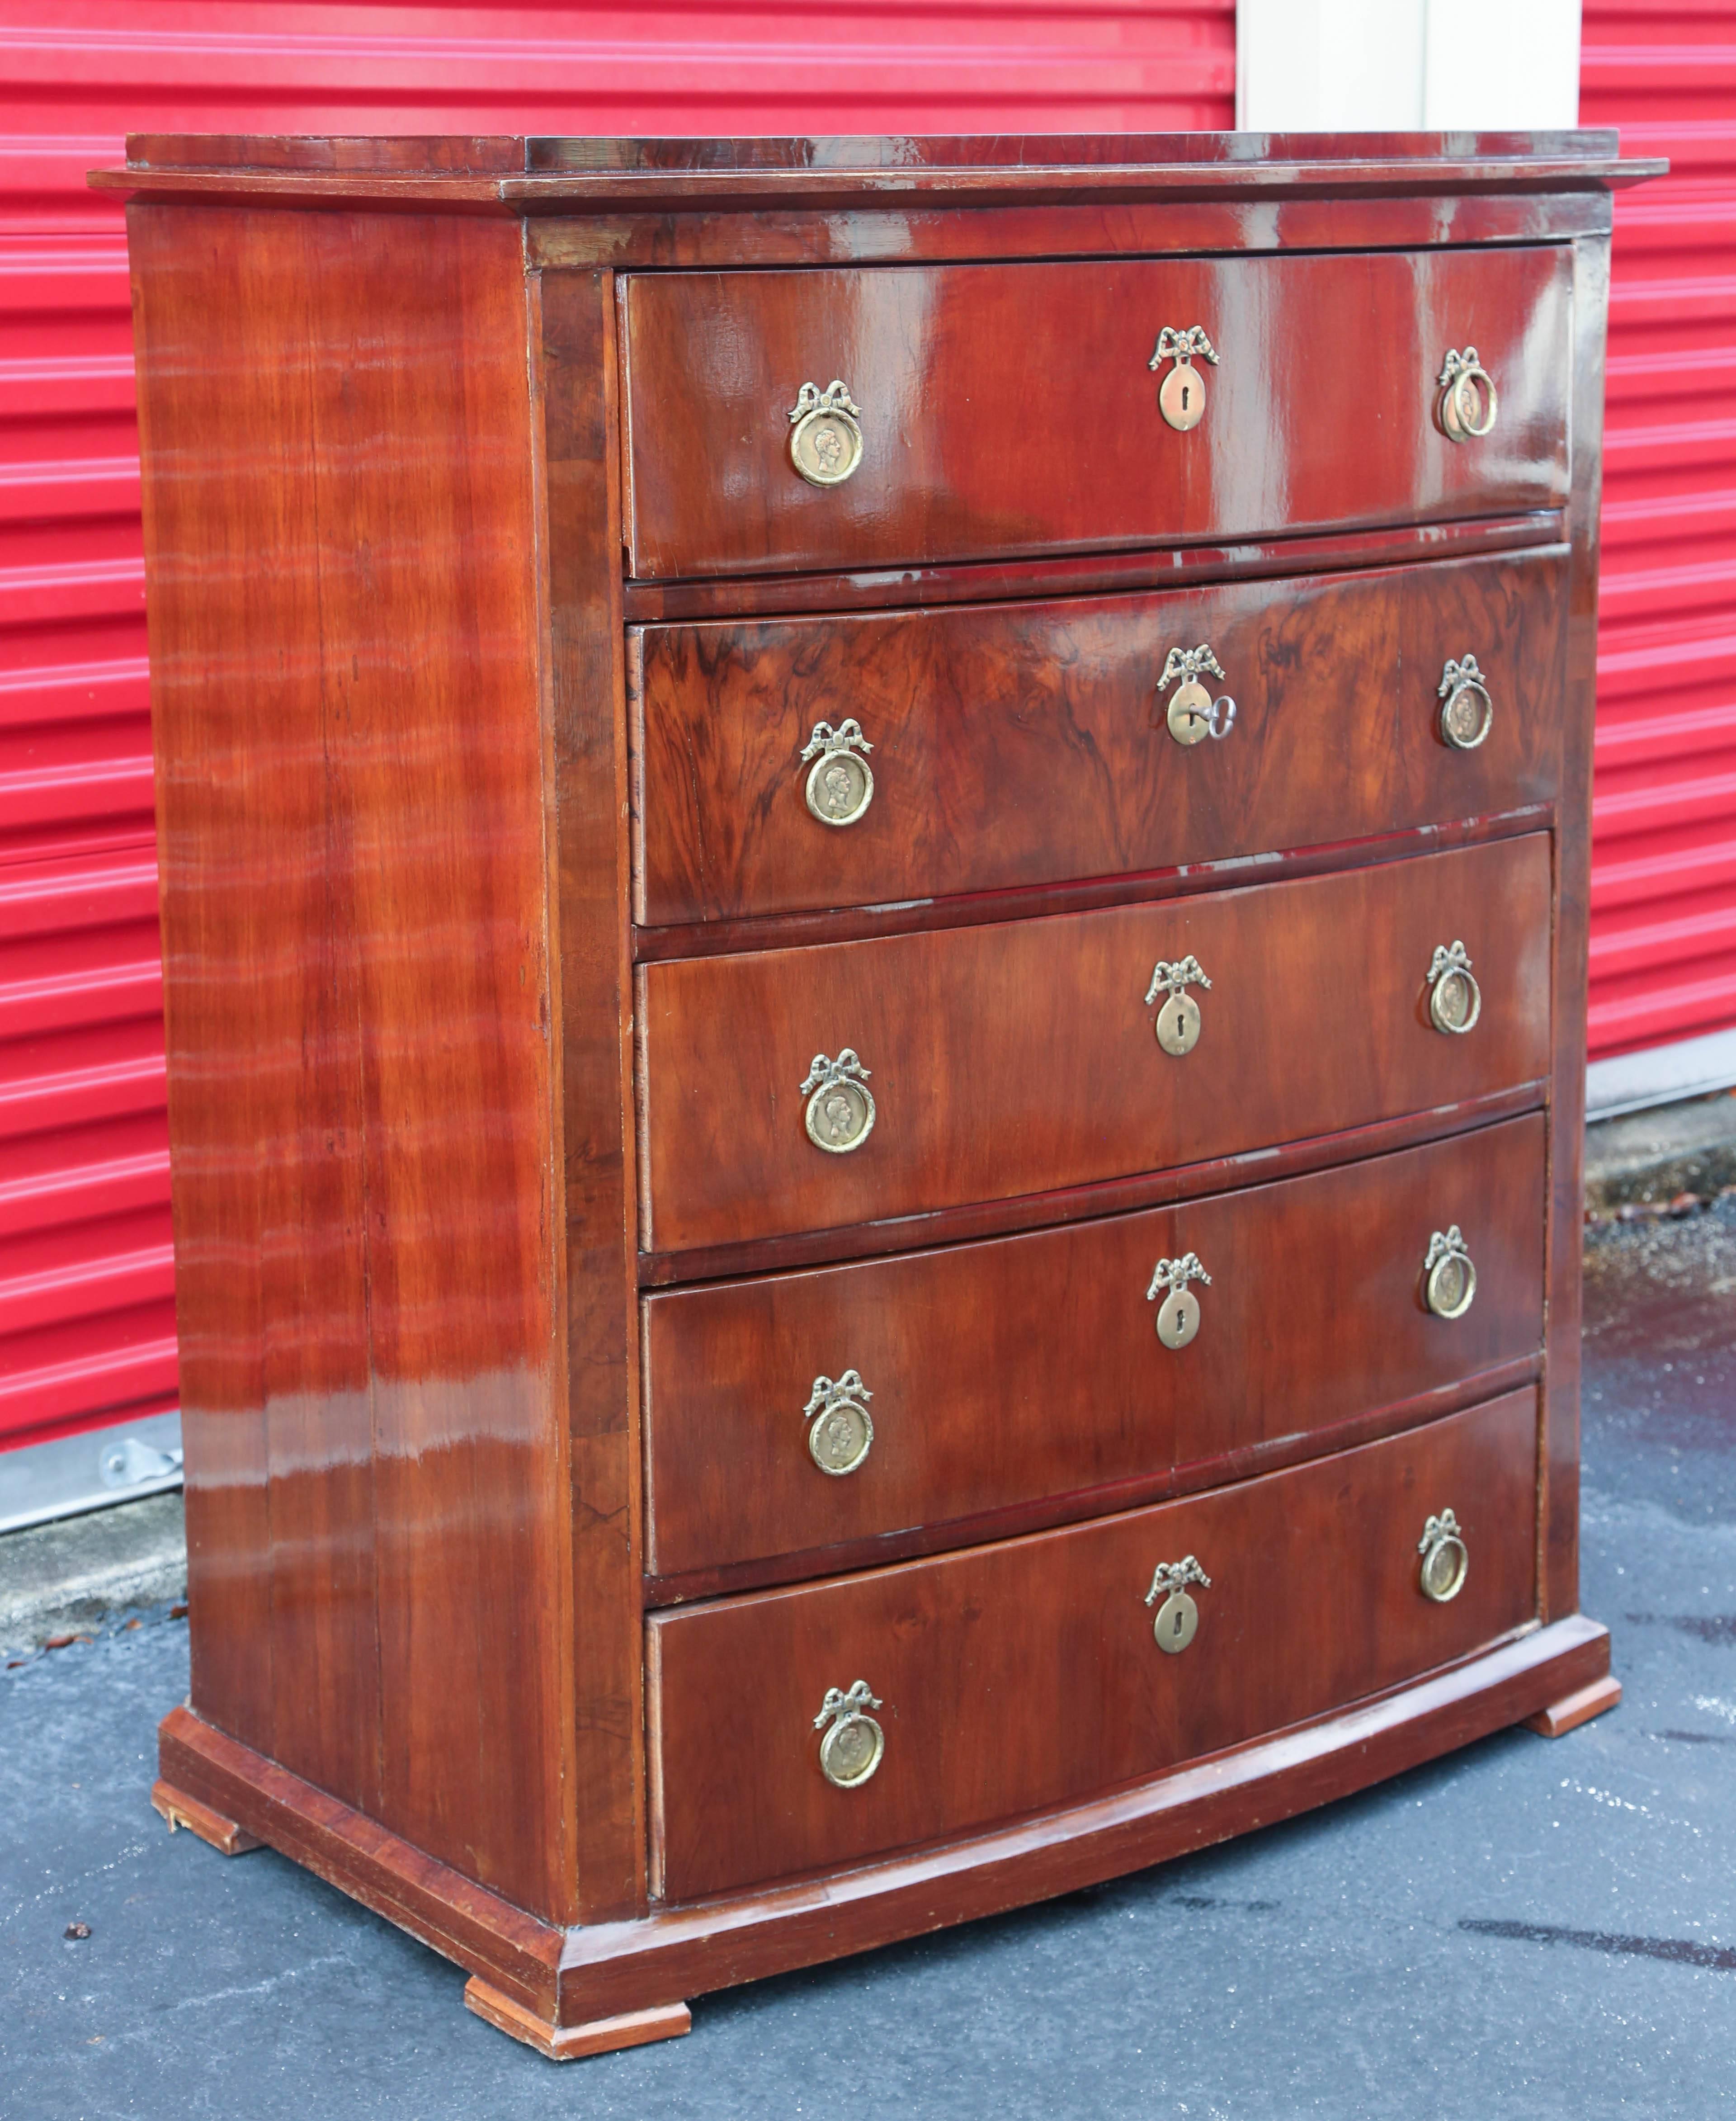 This is a superb quality antique mahogany chest of drawers.
It has all the original brass handles and escutcheons,
All the drawers are solid wood with dovetail joints.
The condition is very good and has the original patina.
To the top drawer it